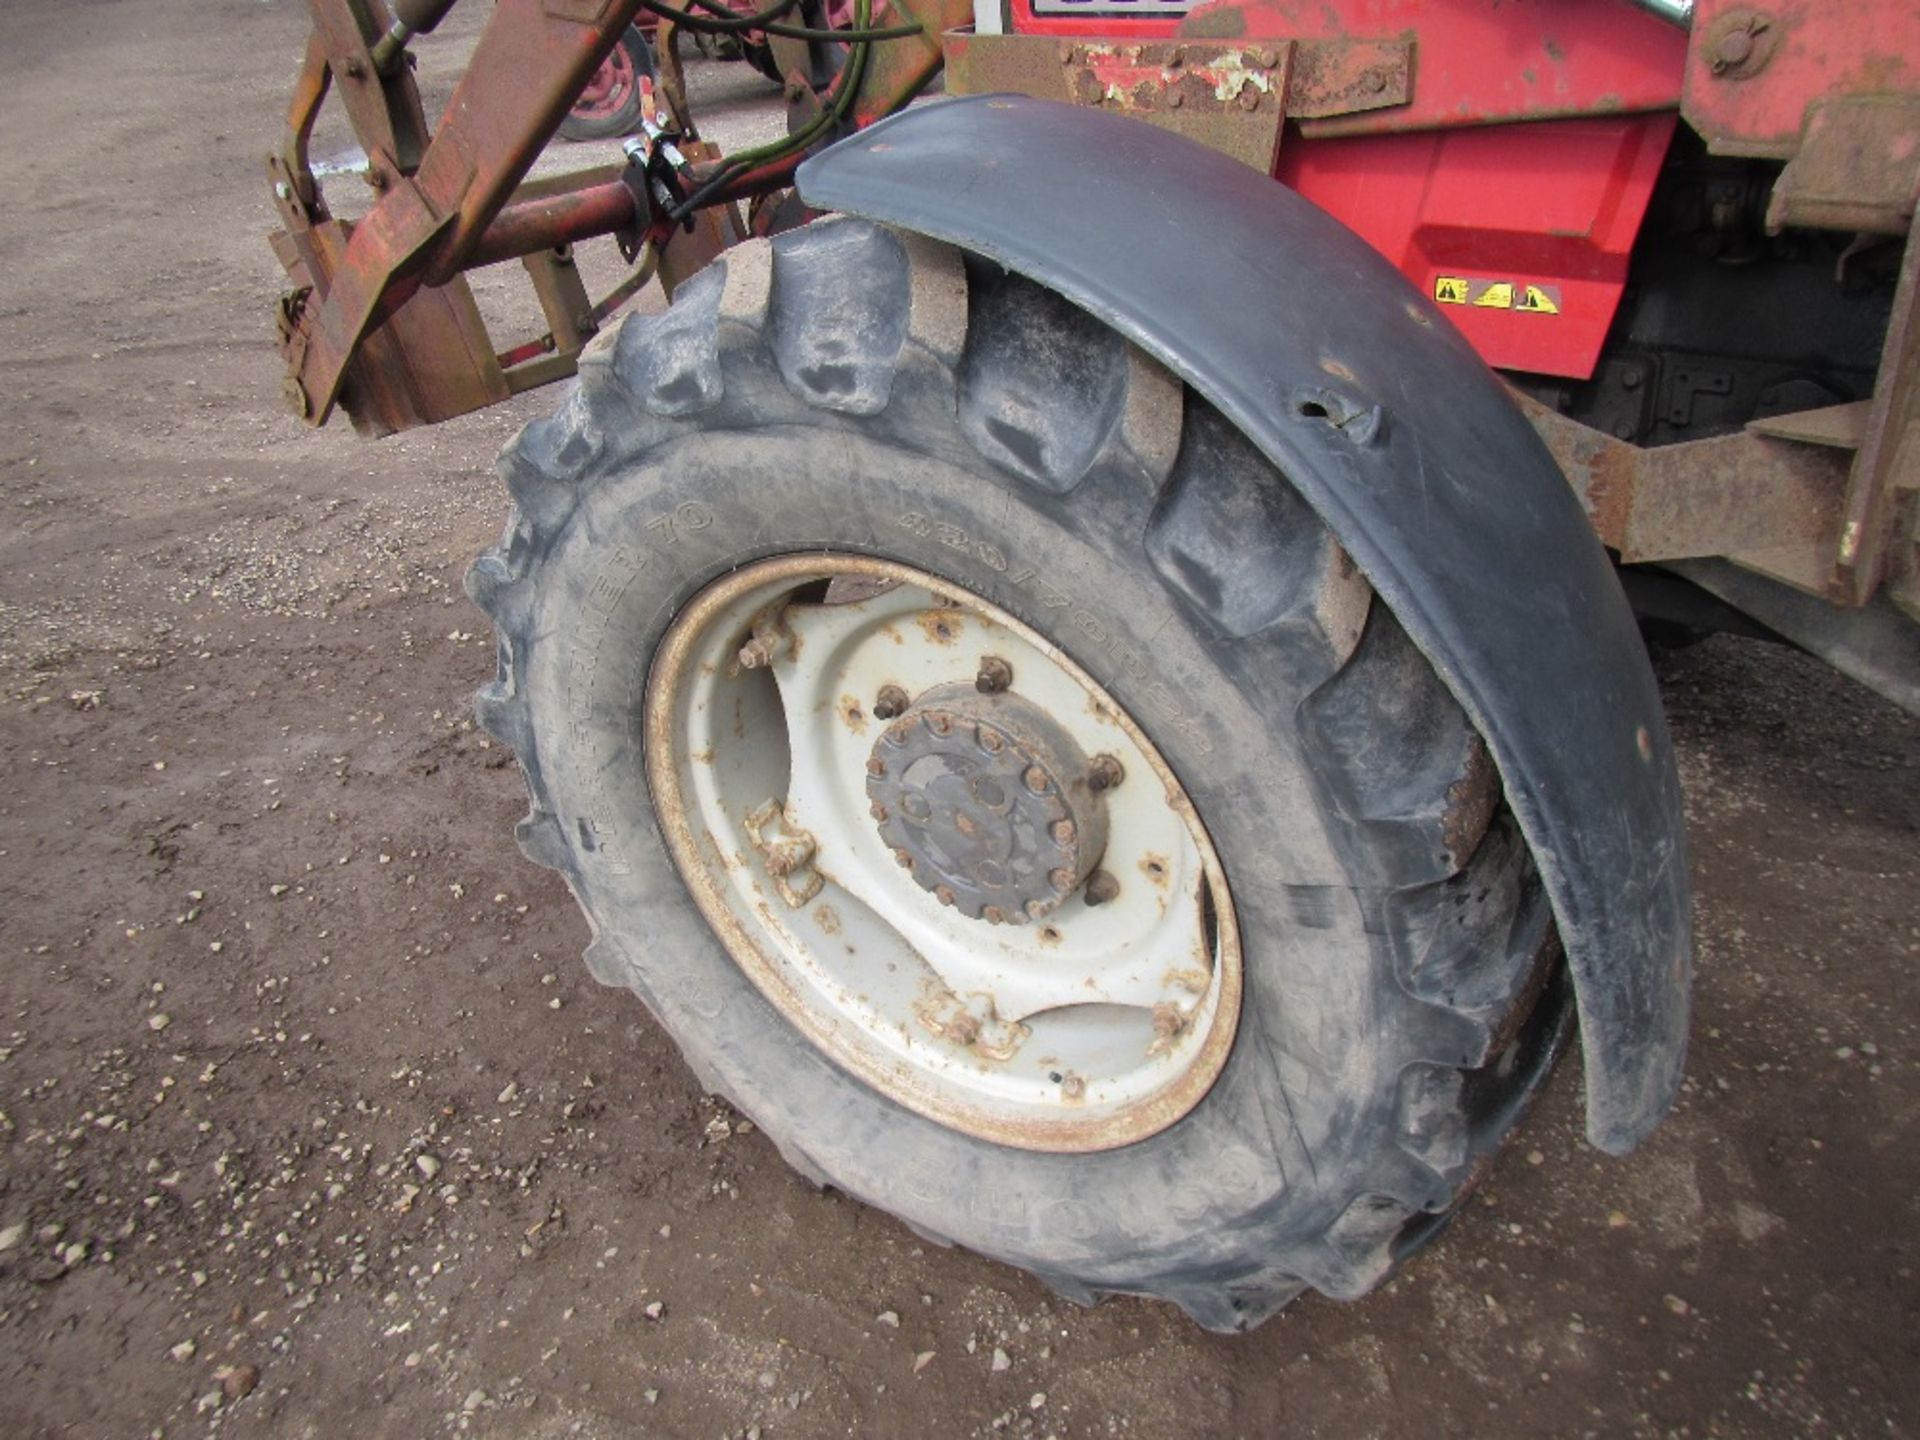 1994 Massey Ferguson 3090 4wd Tractor with Front Loader. Reg. No. M317 OCW Ser. No. C201010 - Image 11 of 17